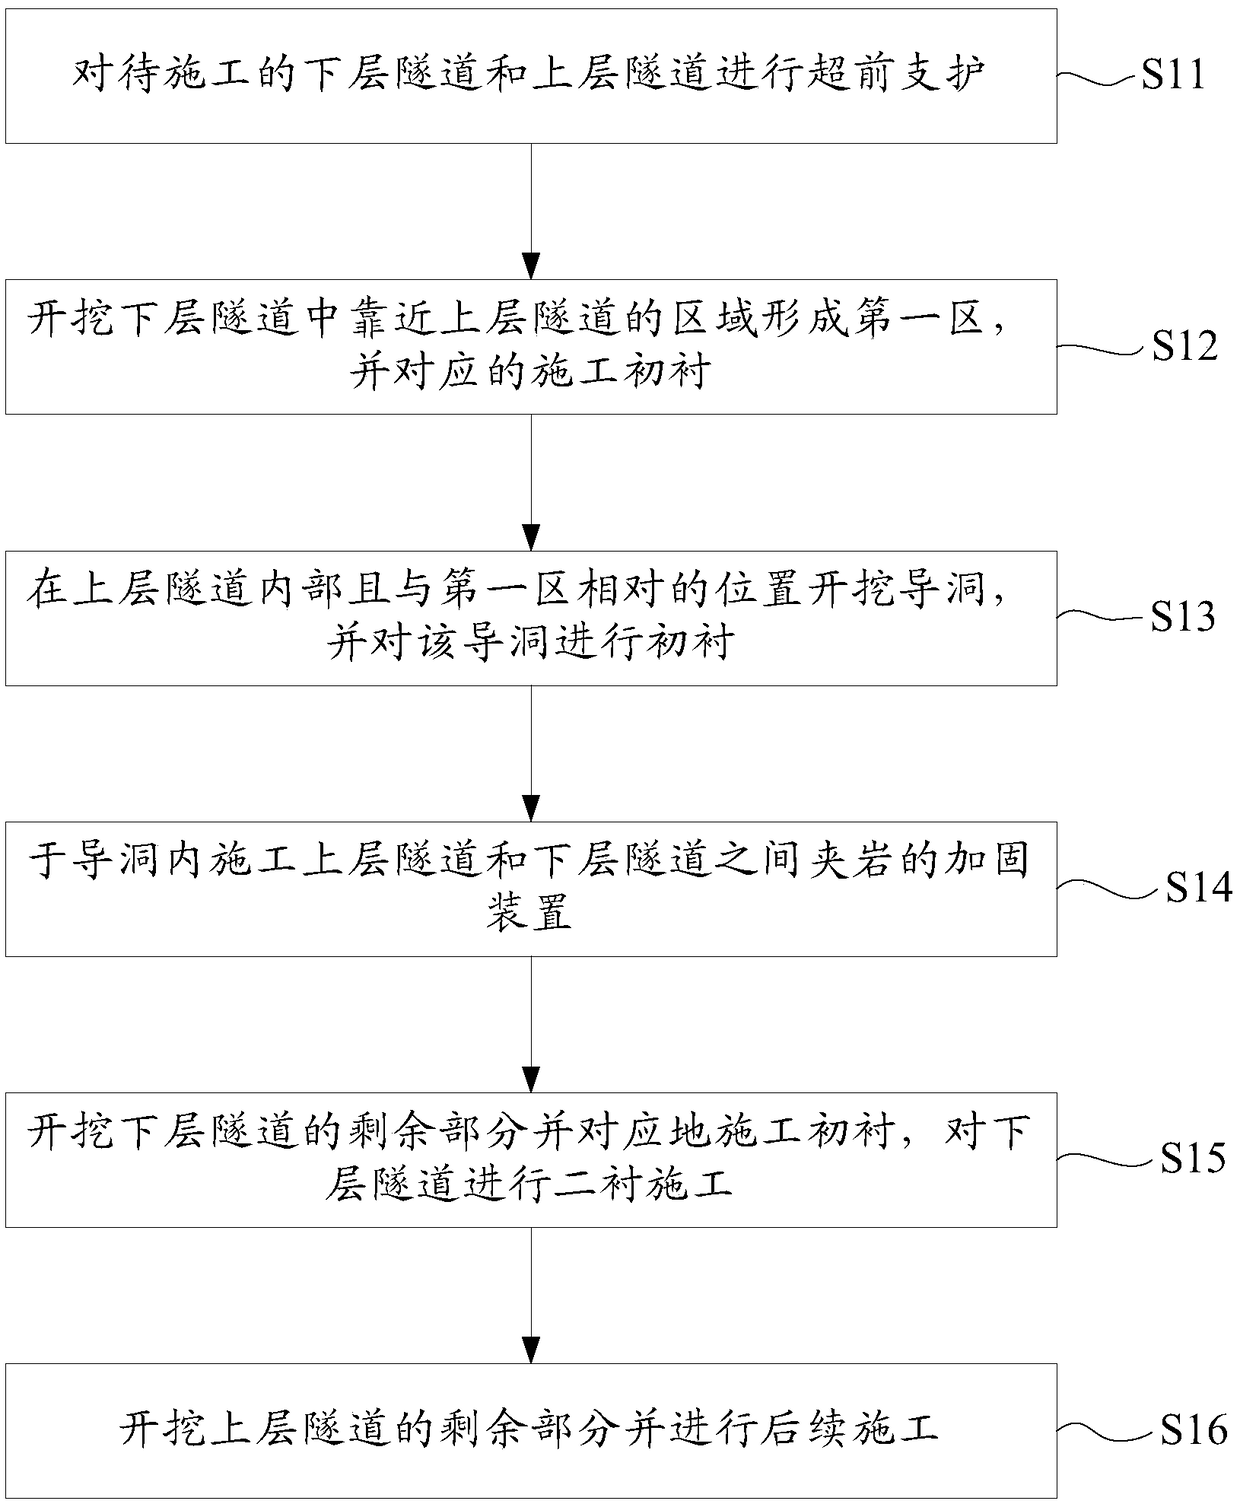 Construction method of small-clear-distance laminated tunnel